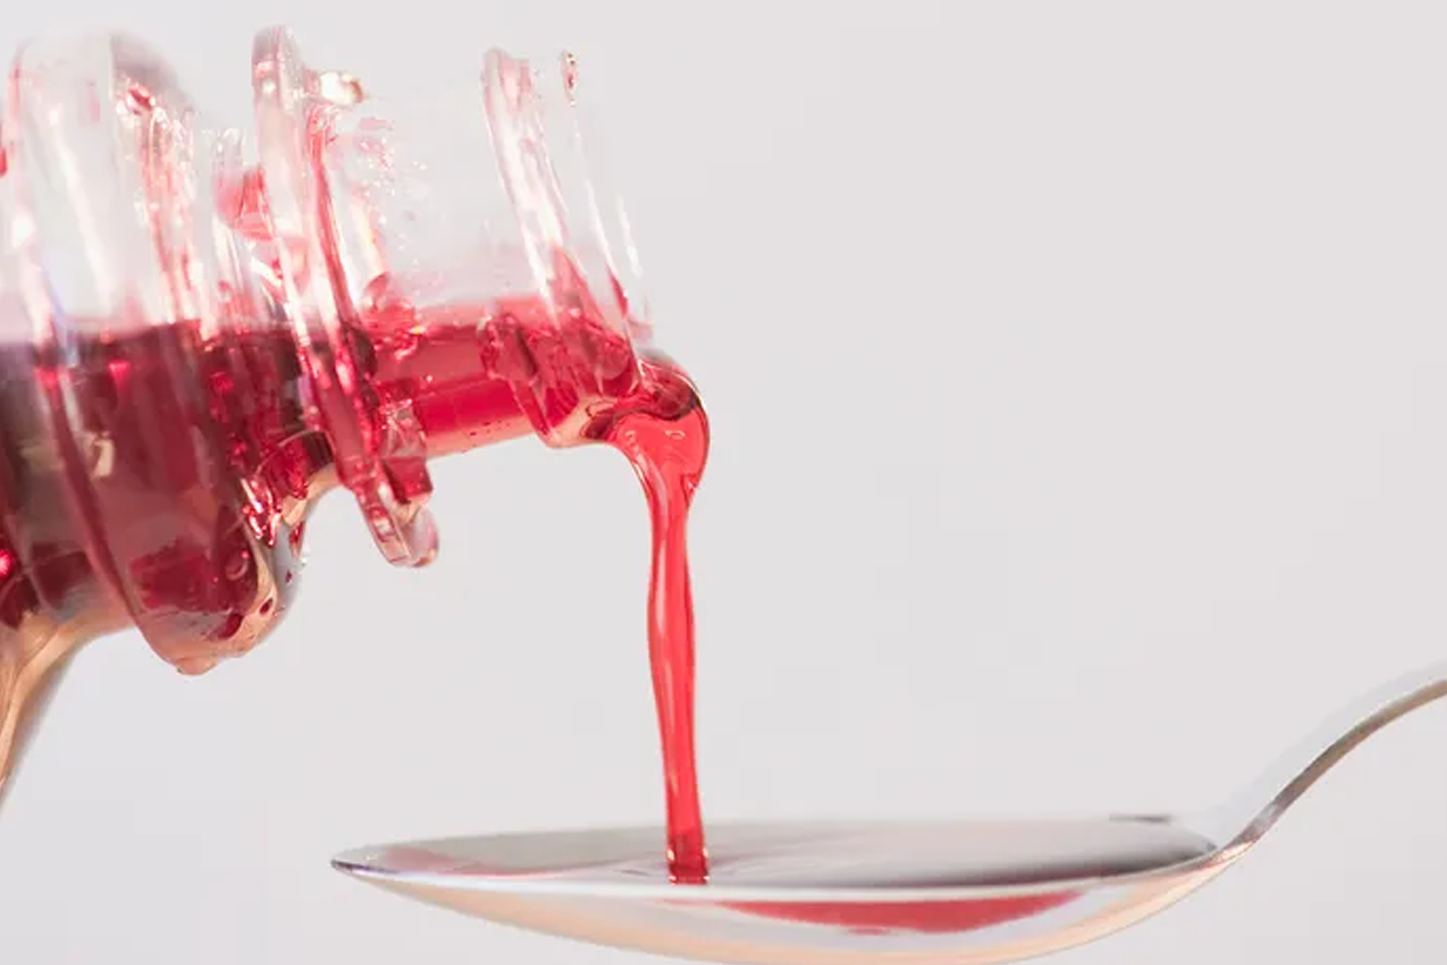 How Much Does Codeine Detox Cost?